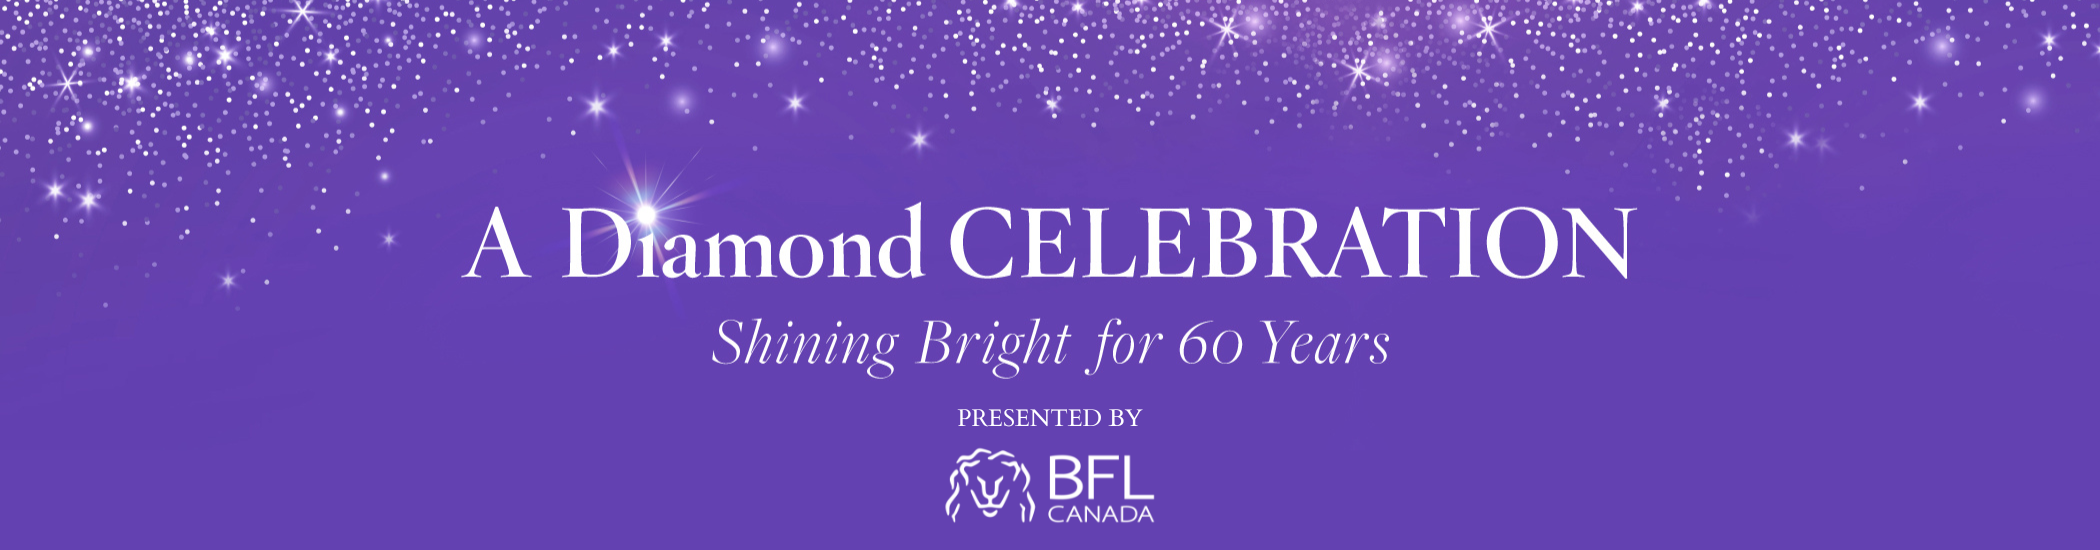 A DIAMOND CELEBRATION. SHINING BRIGHT FOR 60 YEARS